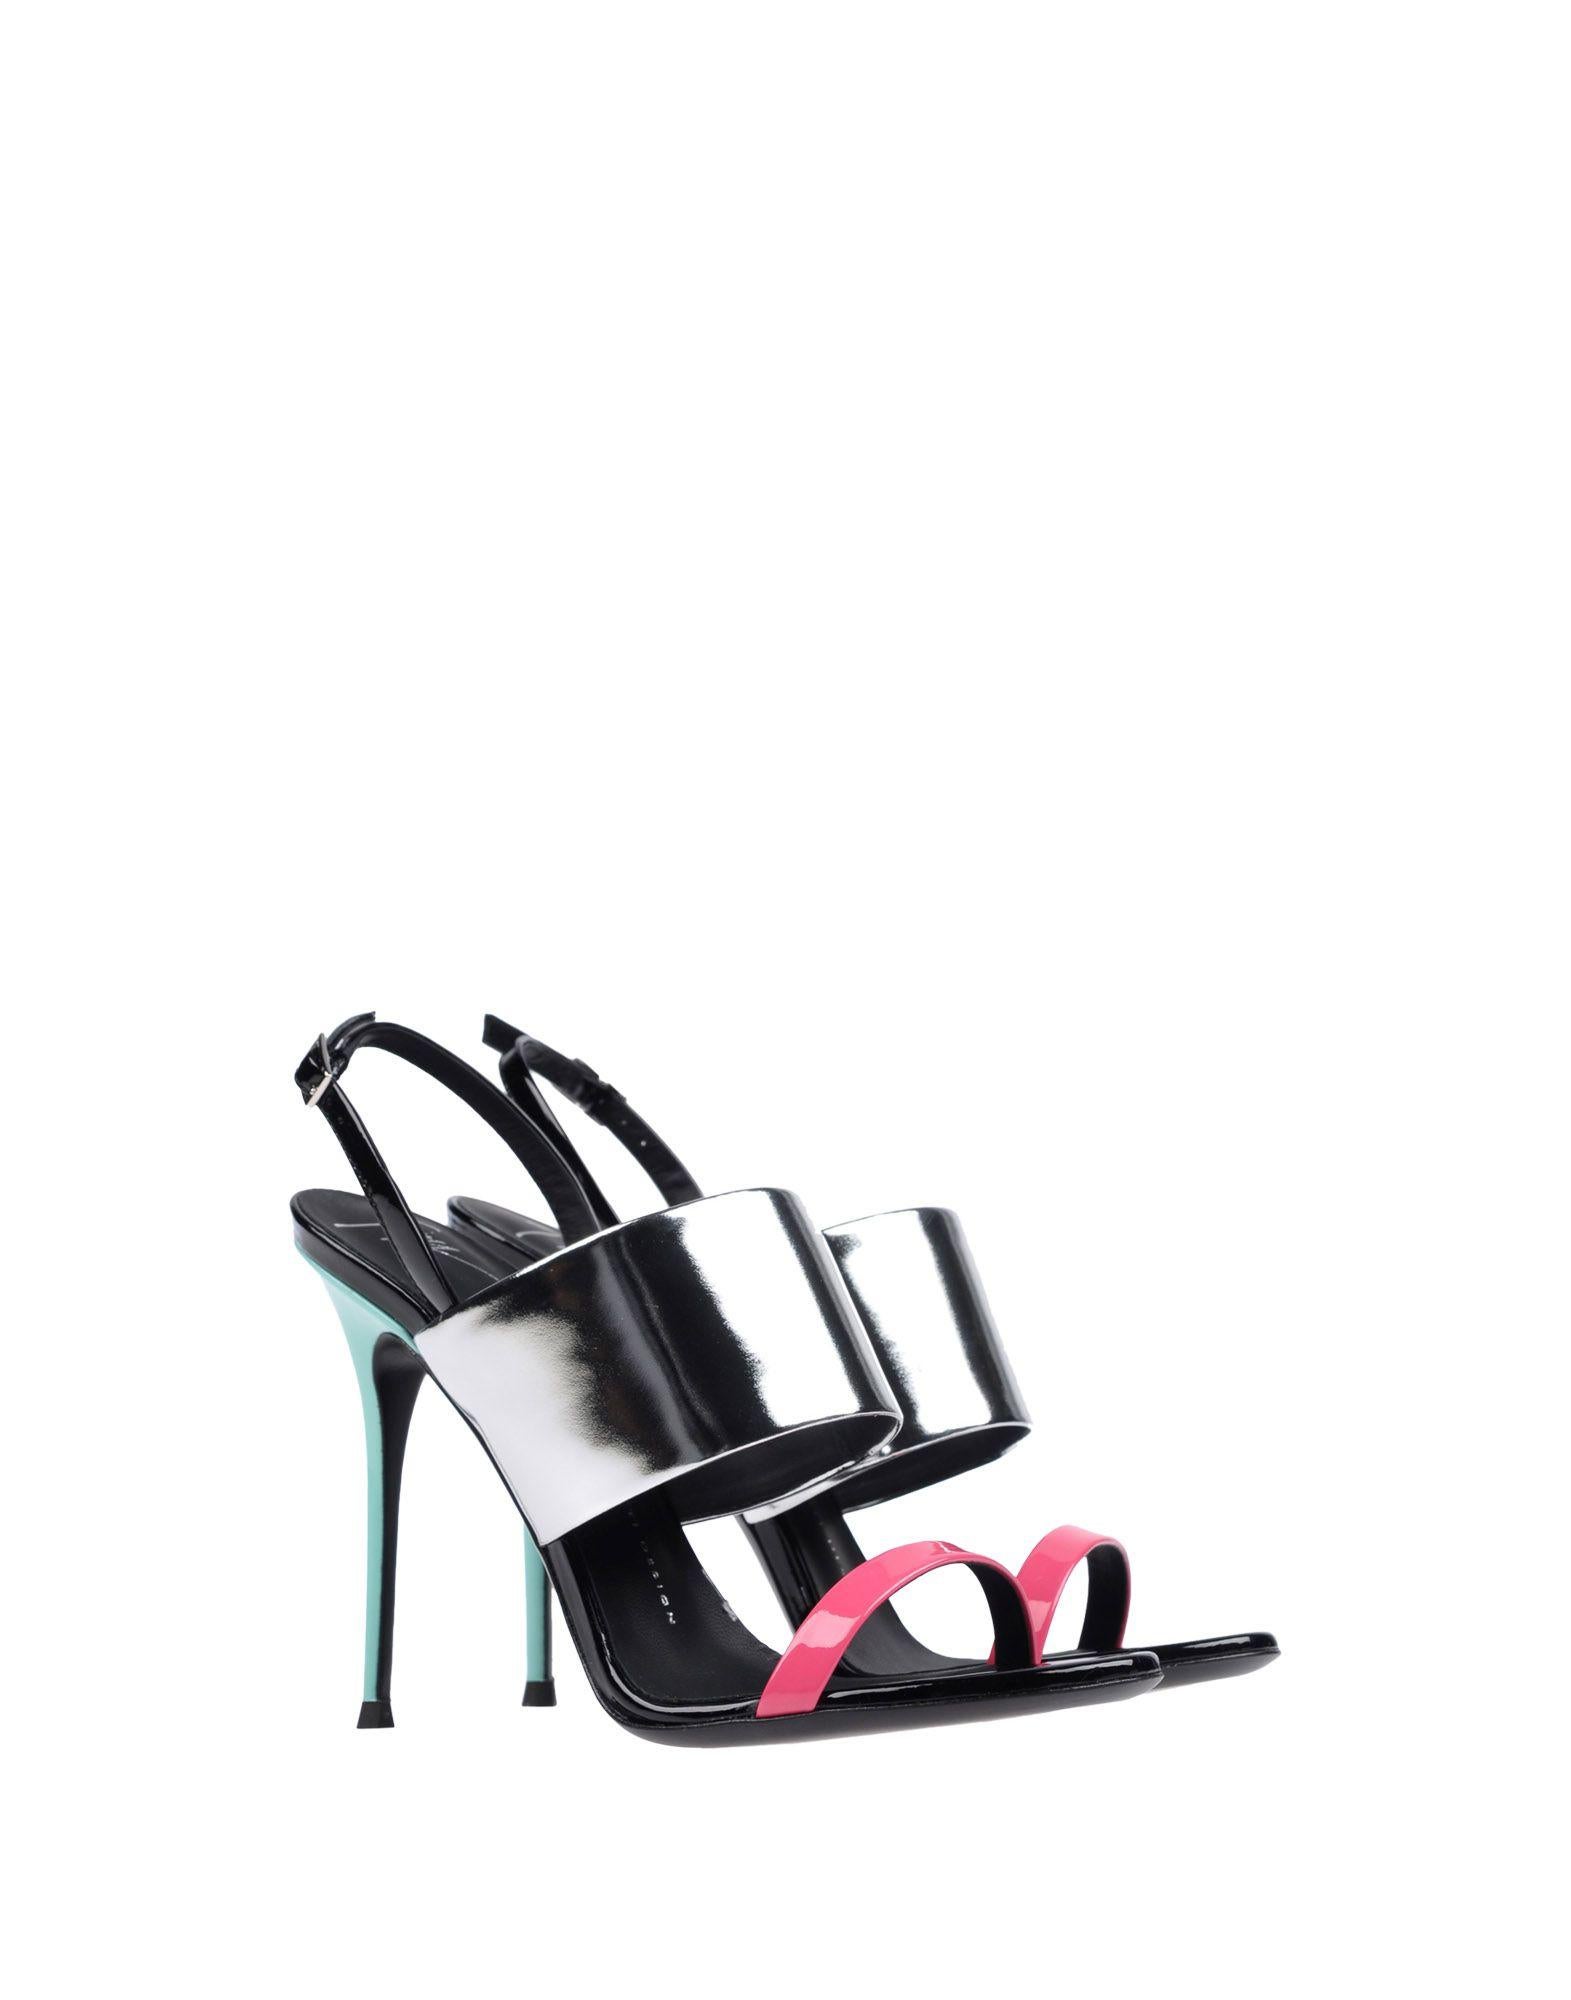 Giuseppe Zanotti NEW Silver Pink Blue Leather Evening Strap Sandals Heels in Box

Size IT 36.5
Leather
Ankle buckle closure
Made in Italy
Heel height 4.25